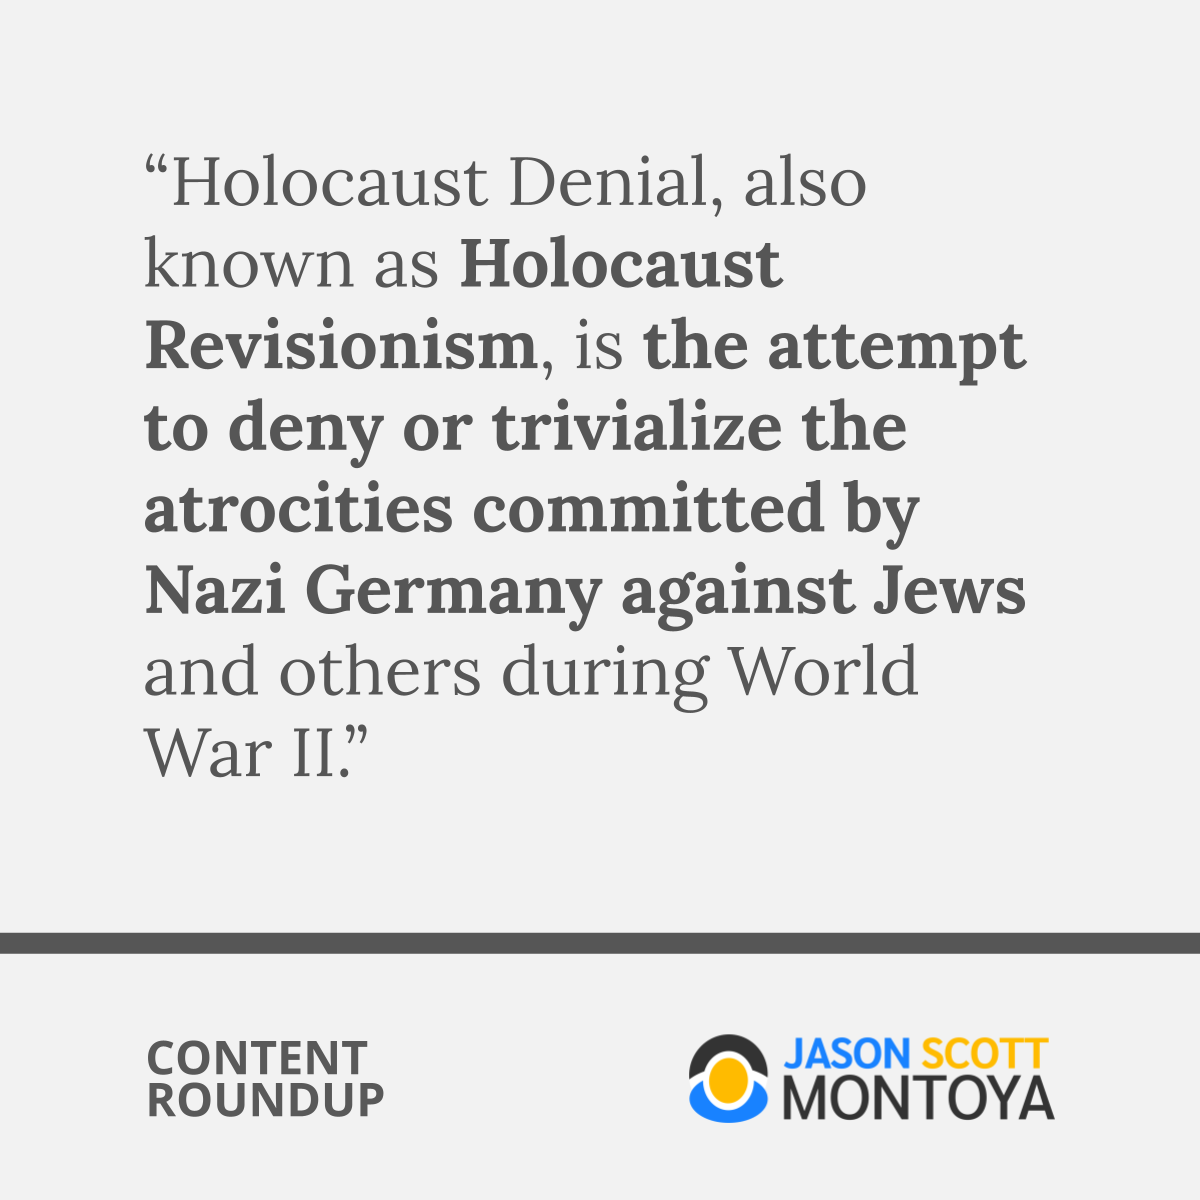 “Holocaust Denial, also known as Holocaust Revisionism, is the attempt to deny or trivialize the atrocities committed by Nazi Germany against Jews and others during World War II.”